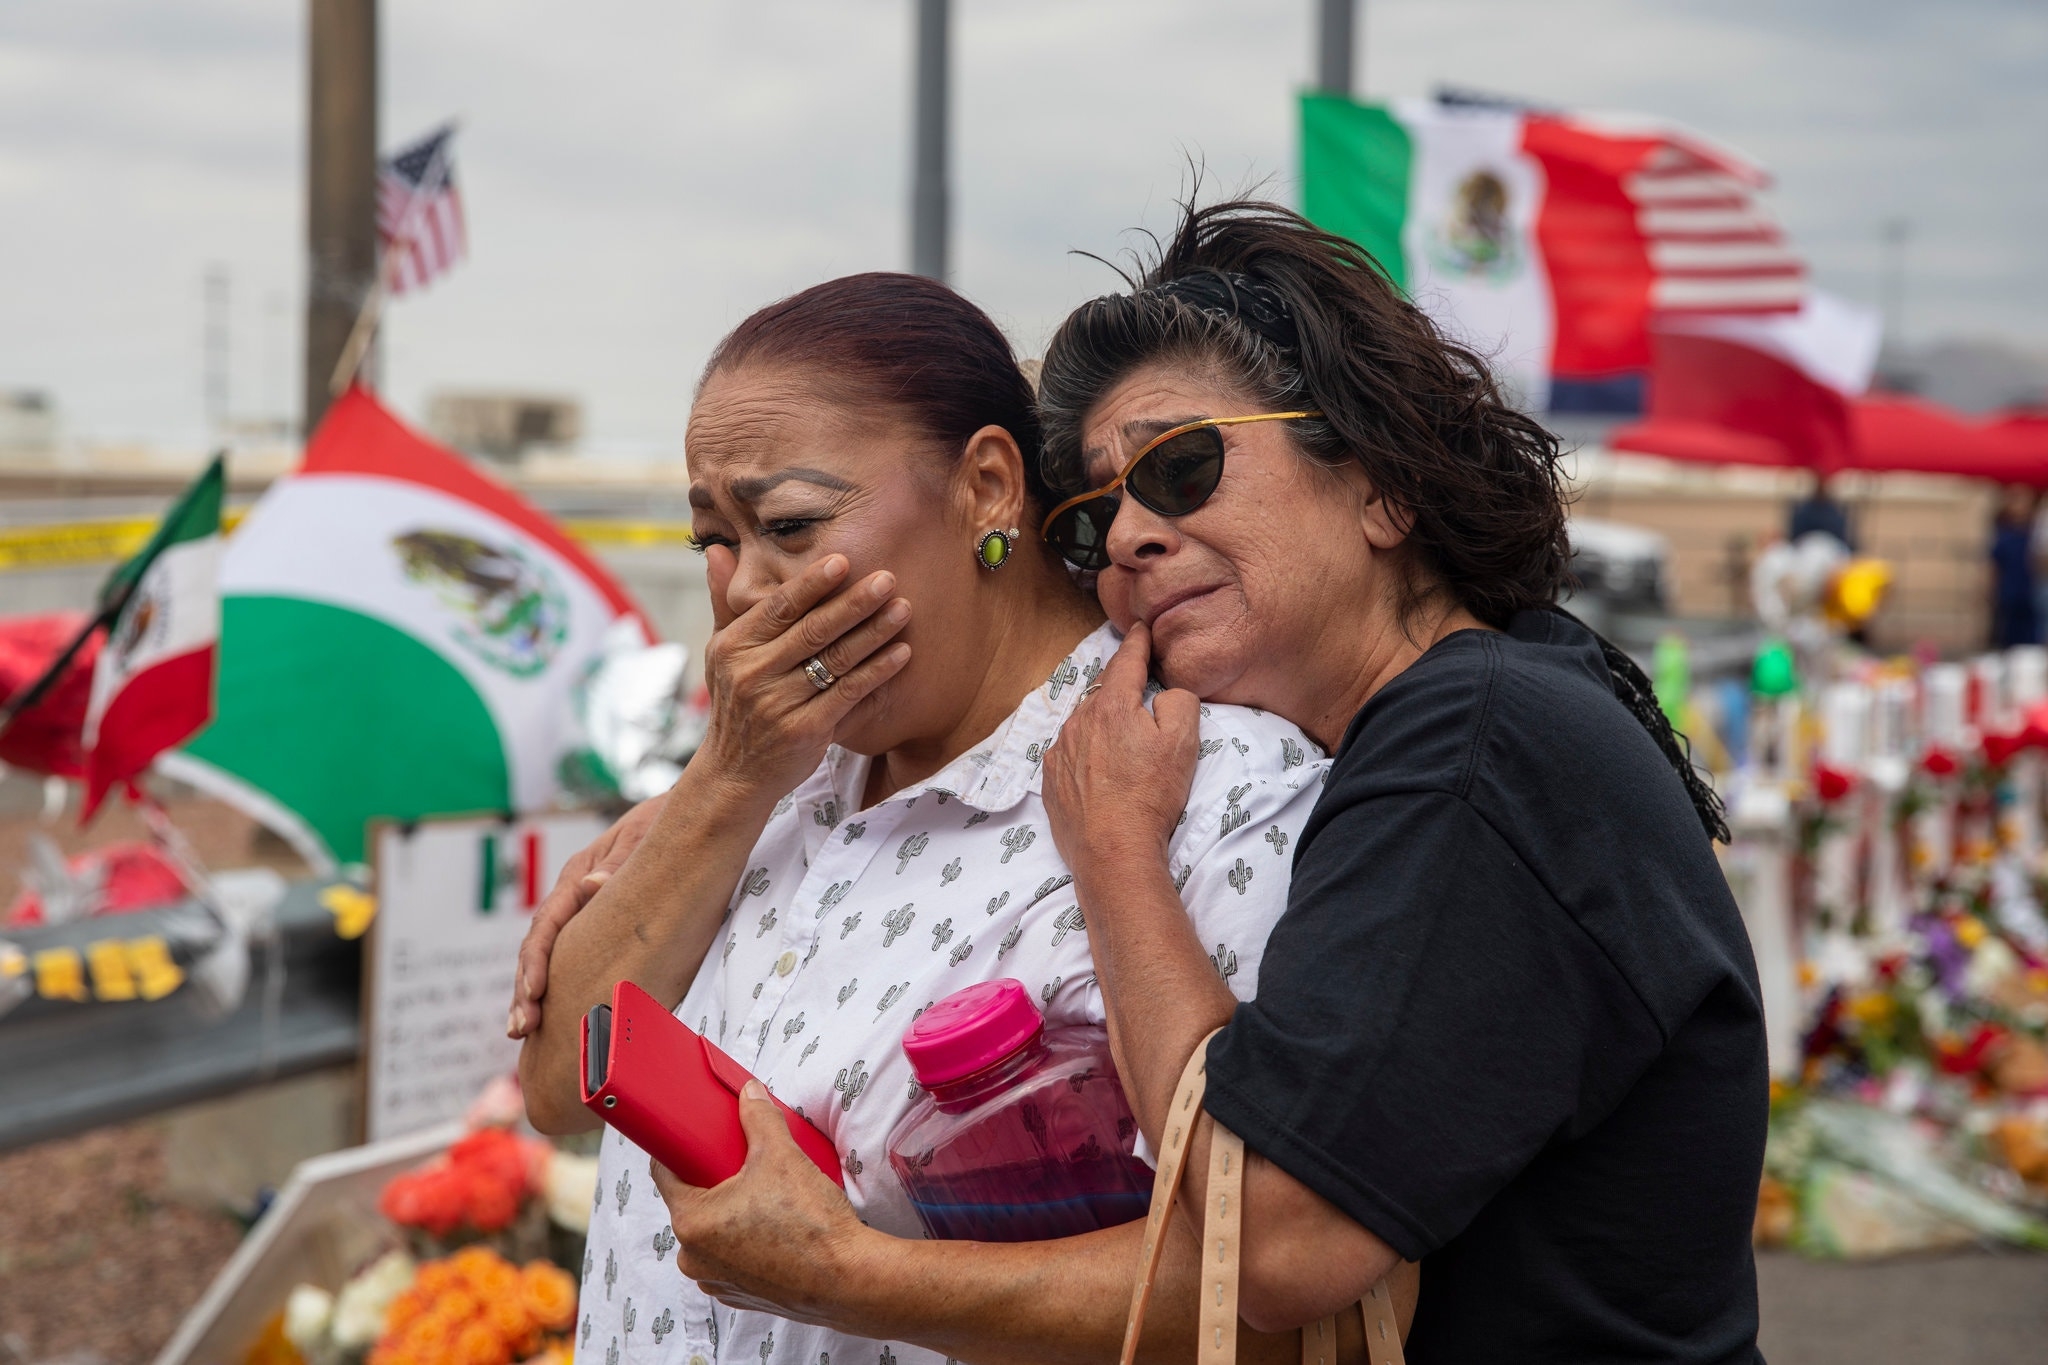 ‘It feels like being hunted’: Latinos across US in fear after El Paso massacre